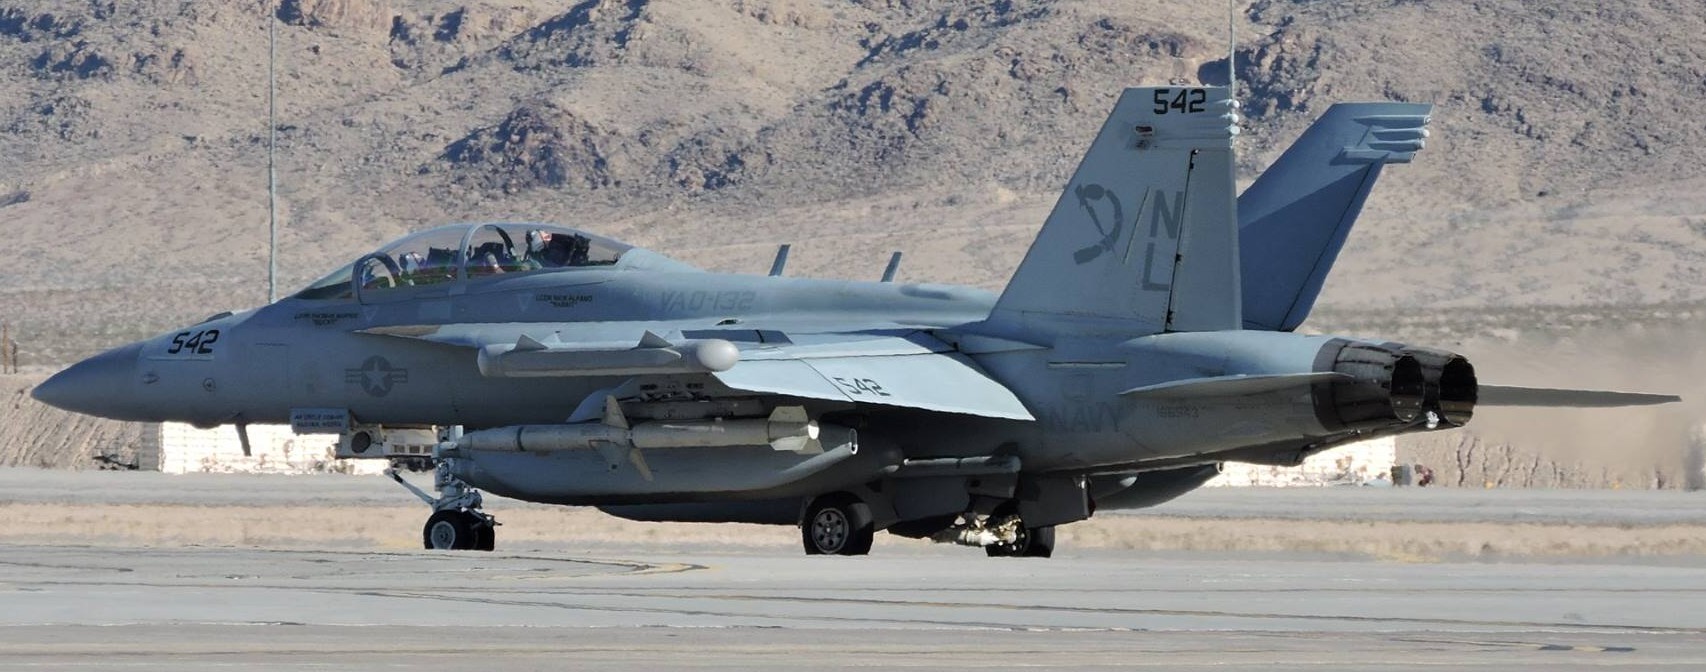 vaq-132 scorpions electronic attack squadron vaqron us navy boeing ea-18g growler exercise red flag nellis afb nevada 24